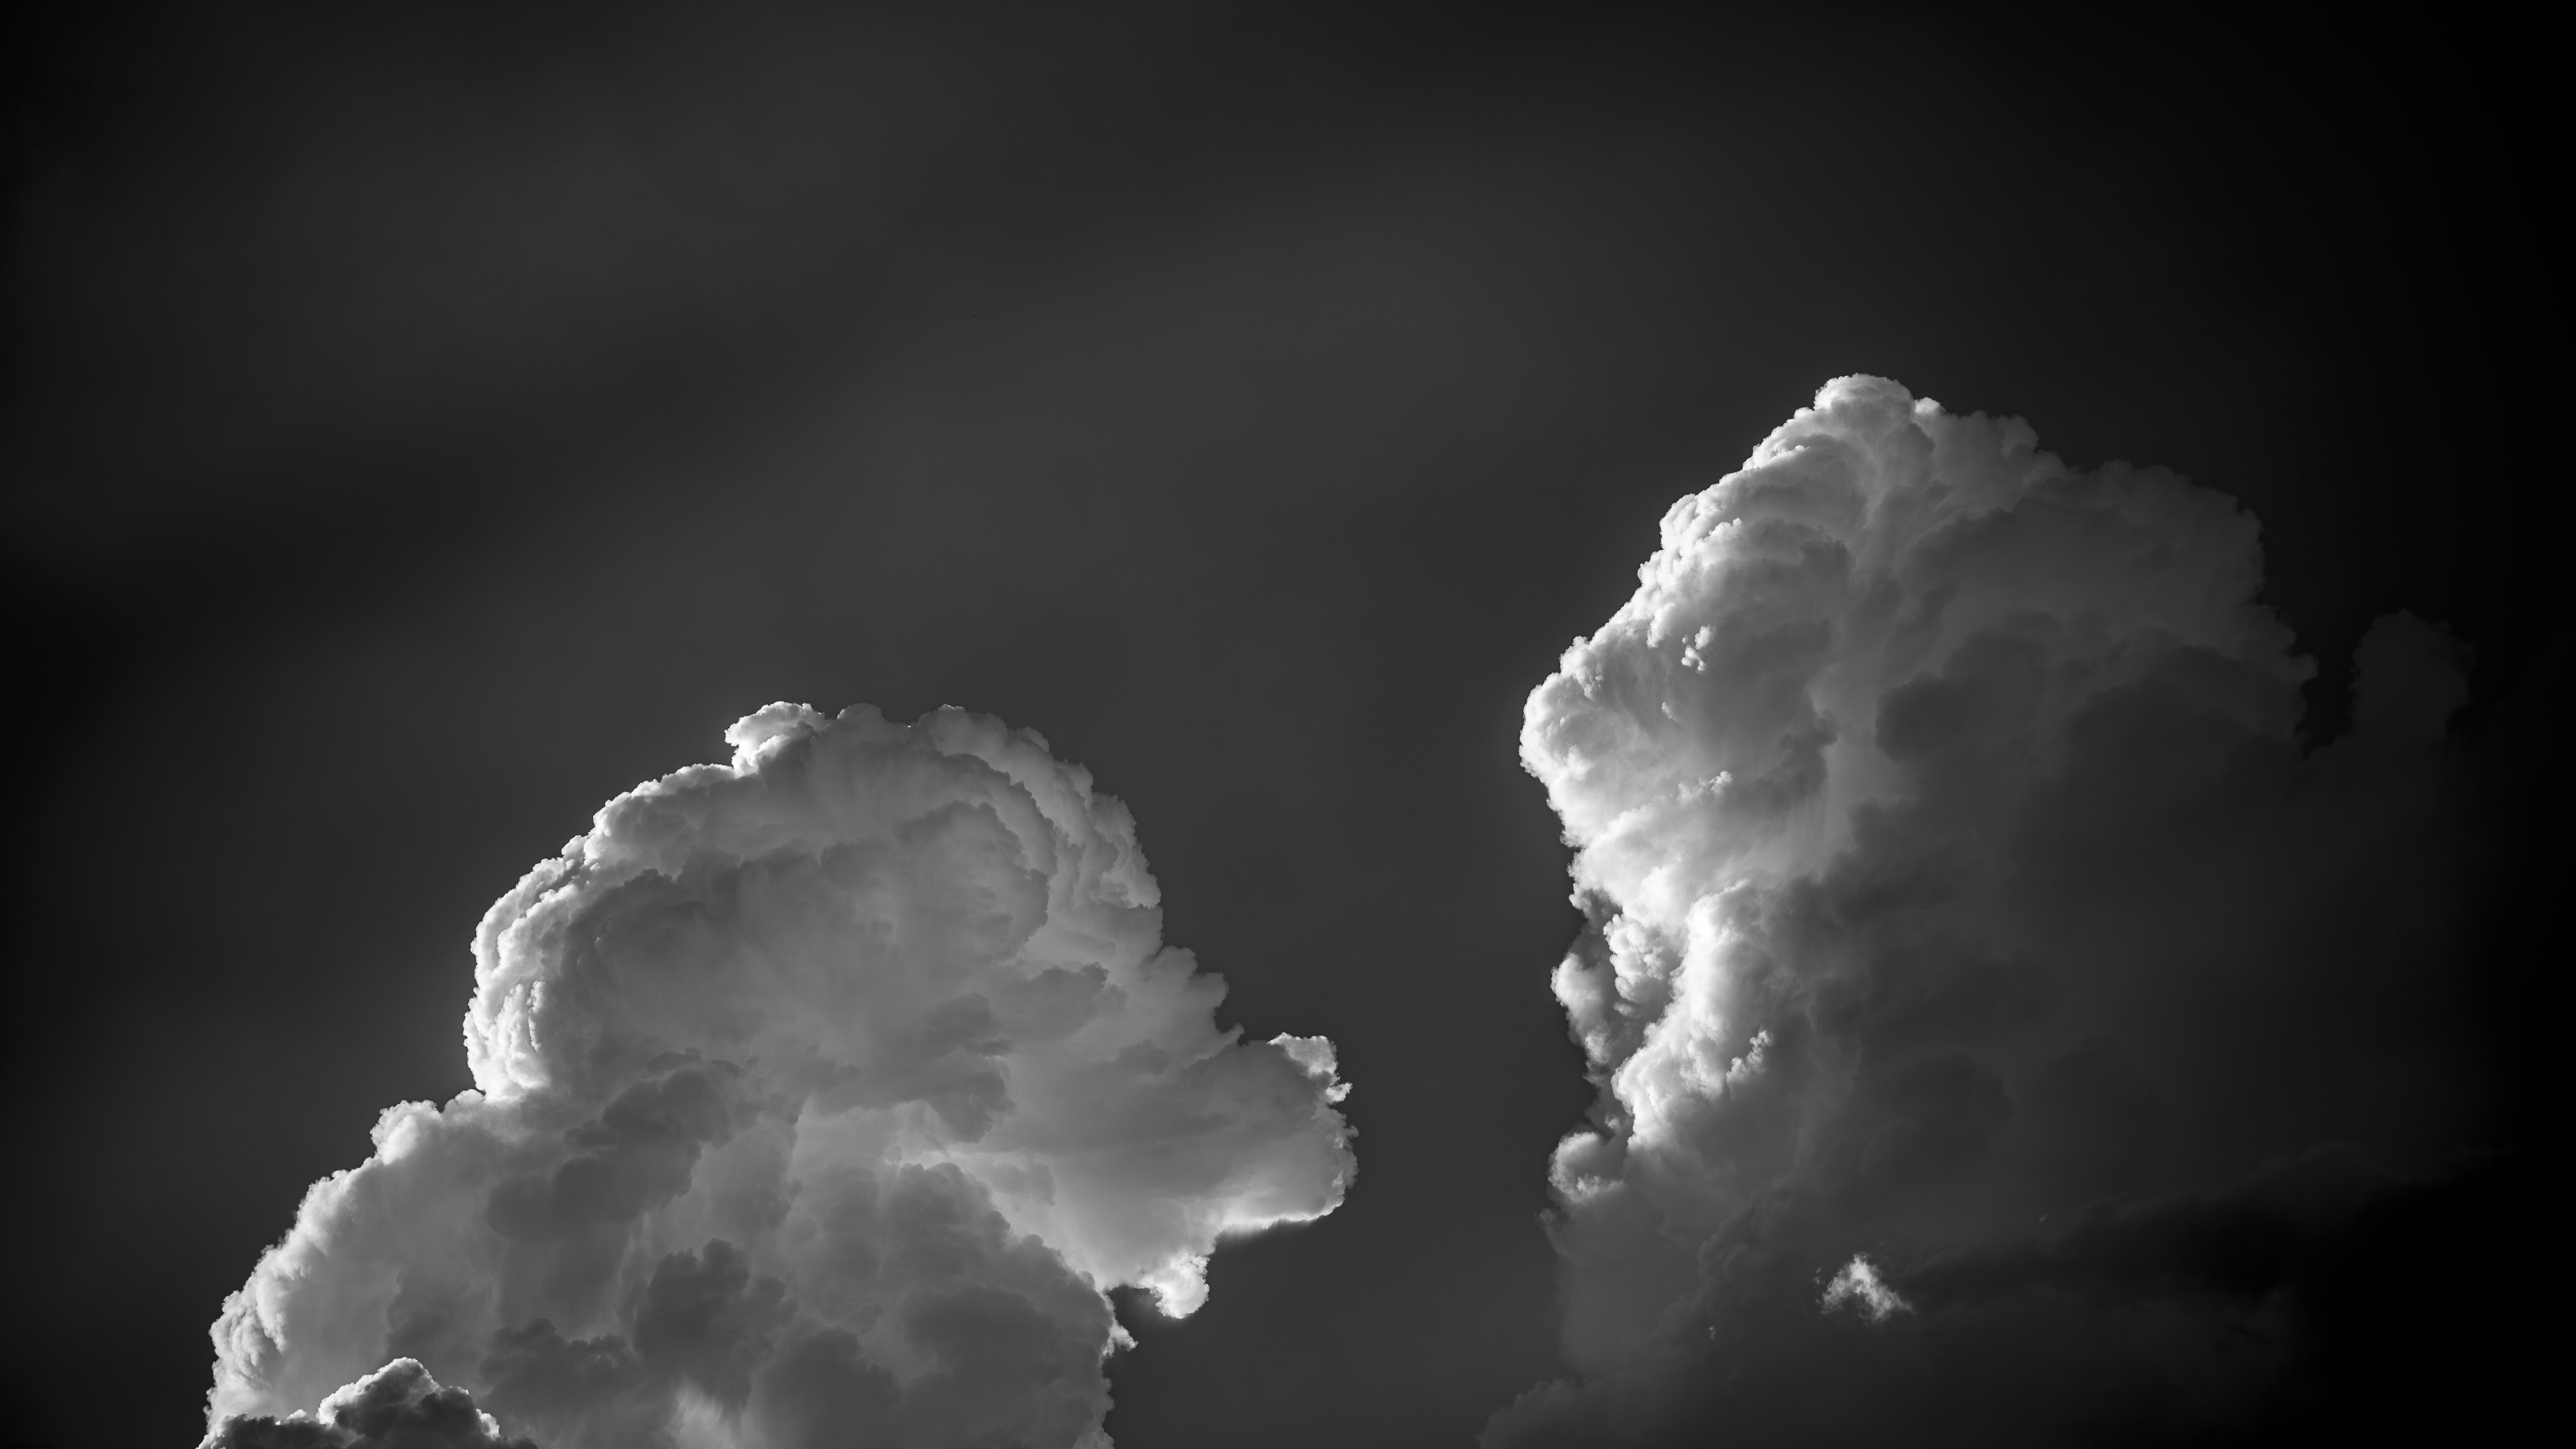 General 6016x3384 clouds nature Jonathan Curry photography monochrome dark outdoors minimalism